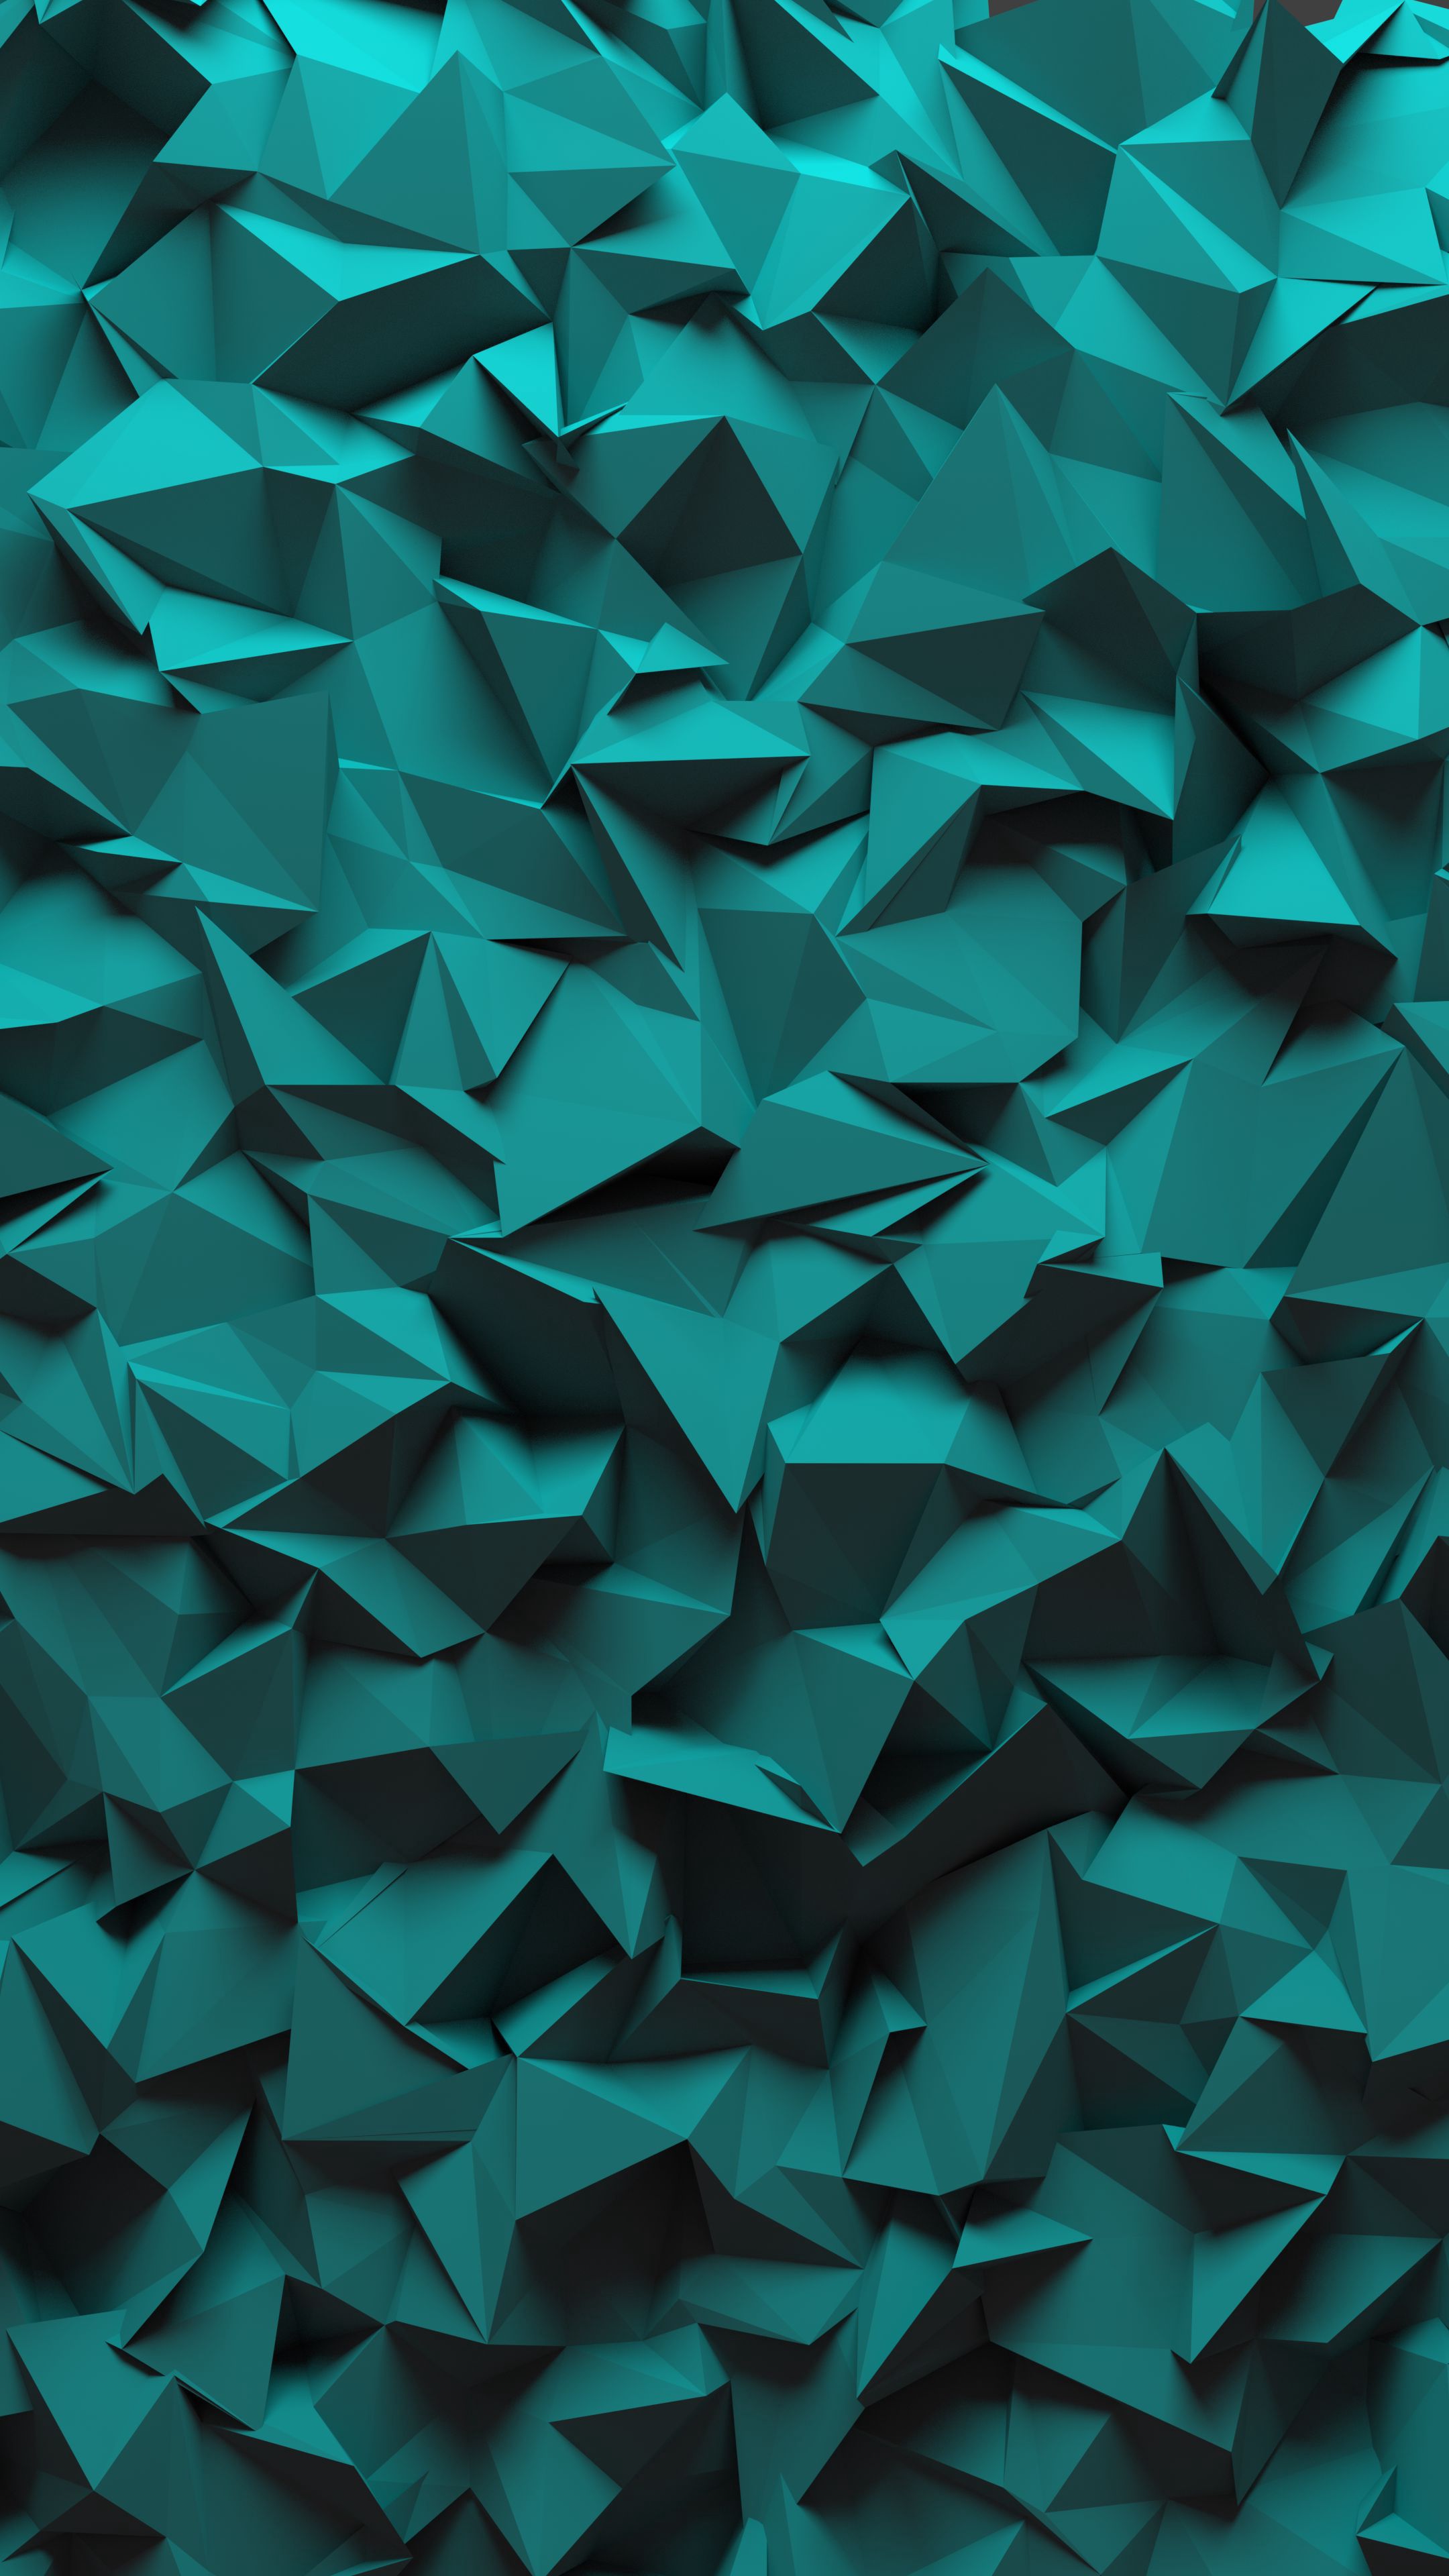 Download "Geometric" wallpapers for